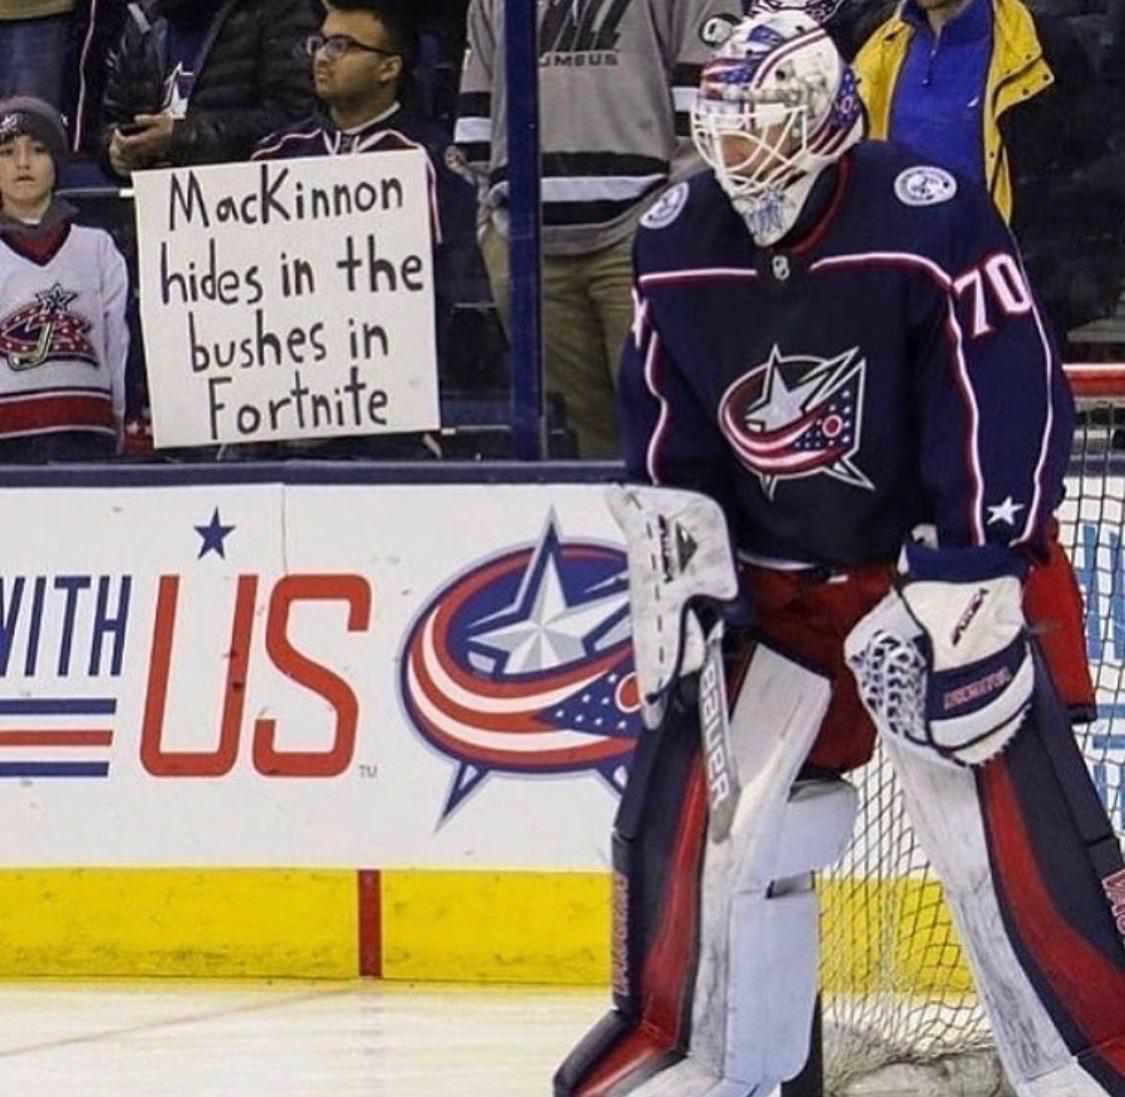 funny picture of man holding up sign accusing hockey player of hiding in the bushes in the video game fortnite